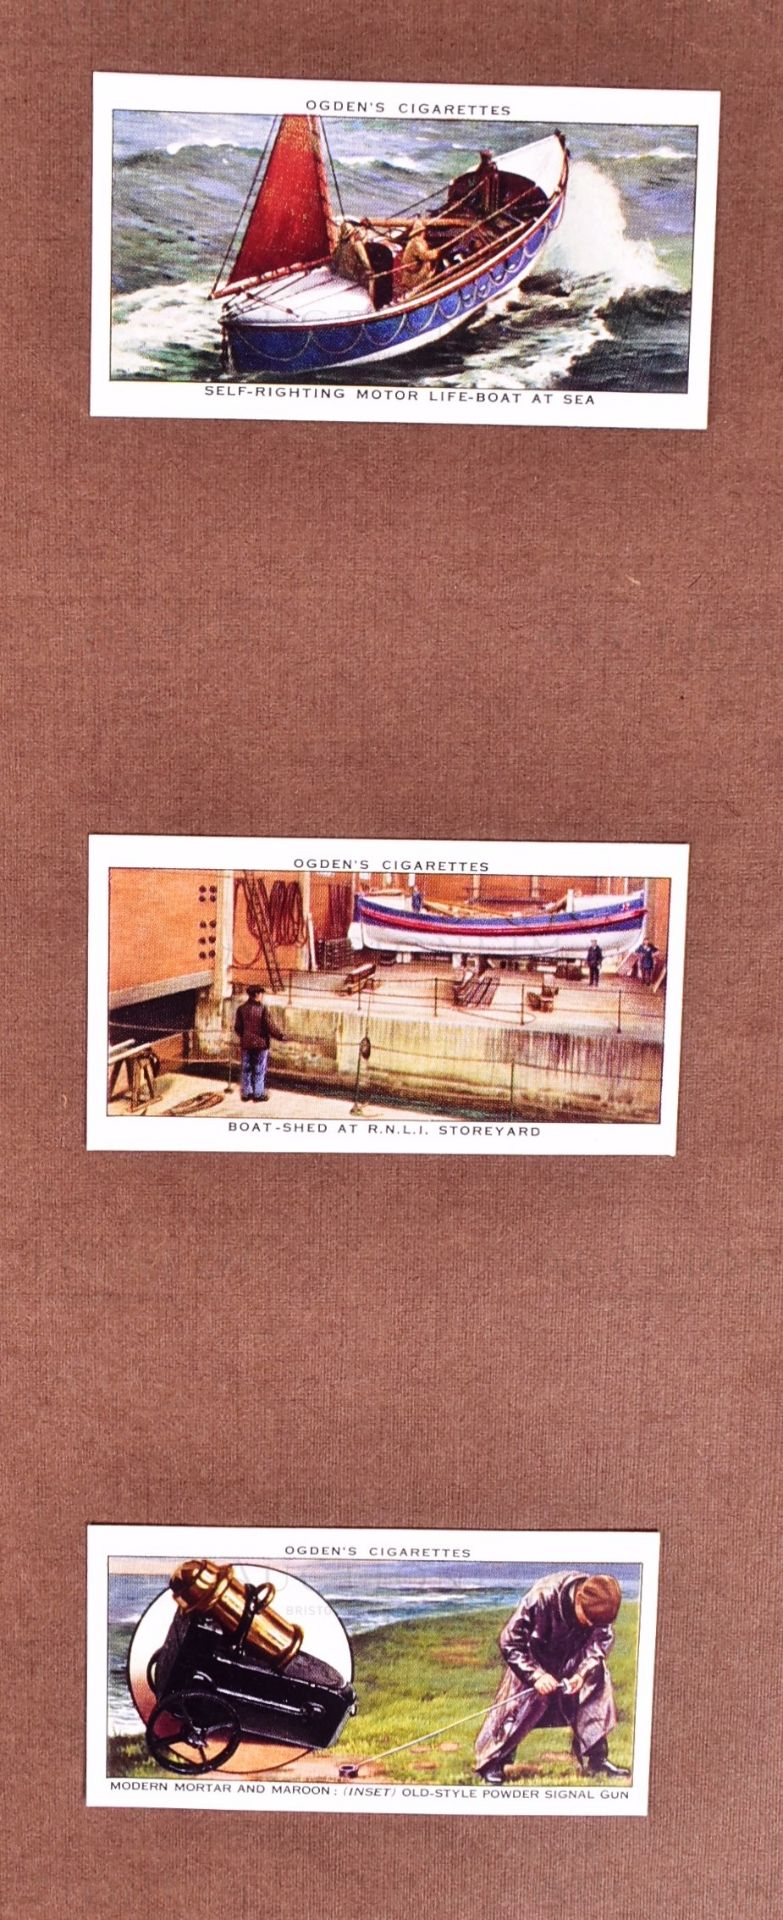 OGDENS CIGARETTES - THE STORY OF THE LIFEBOAT - PRINTER'S PROOF CARDS - Image 3 of 6